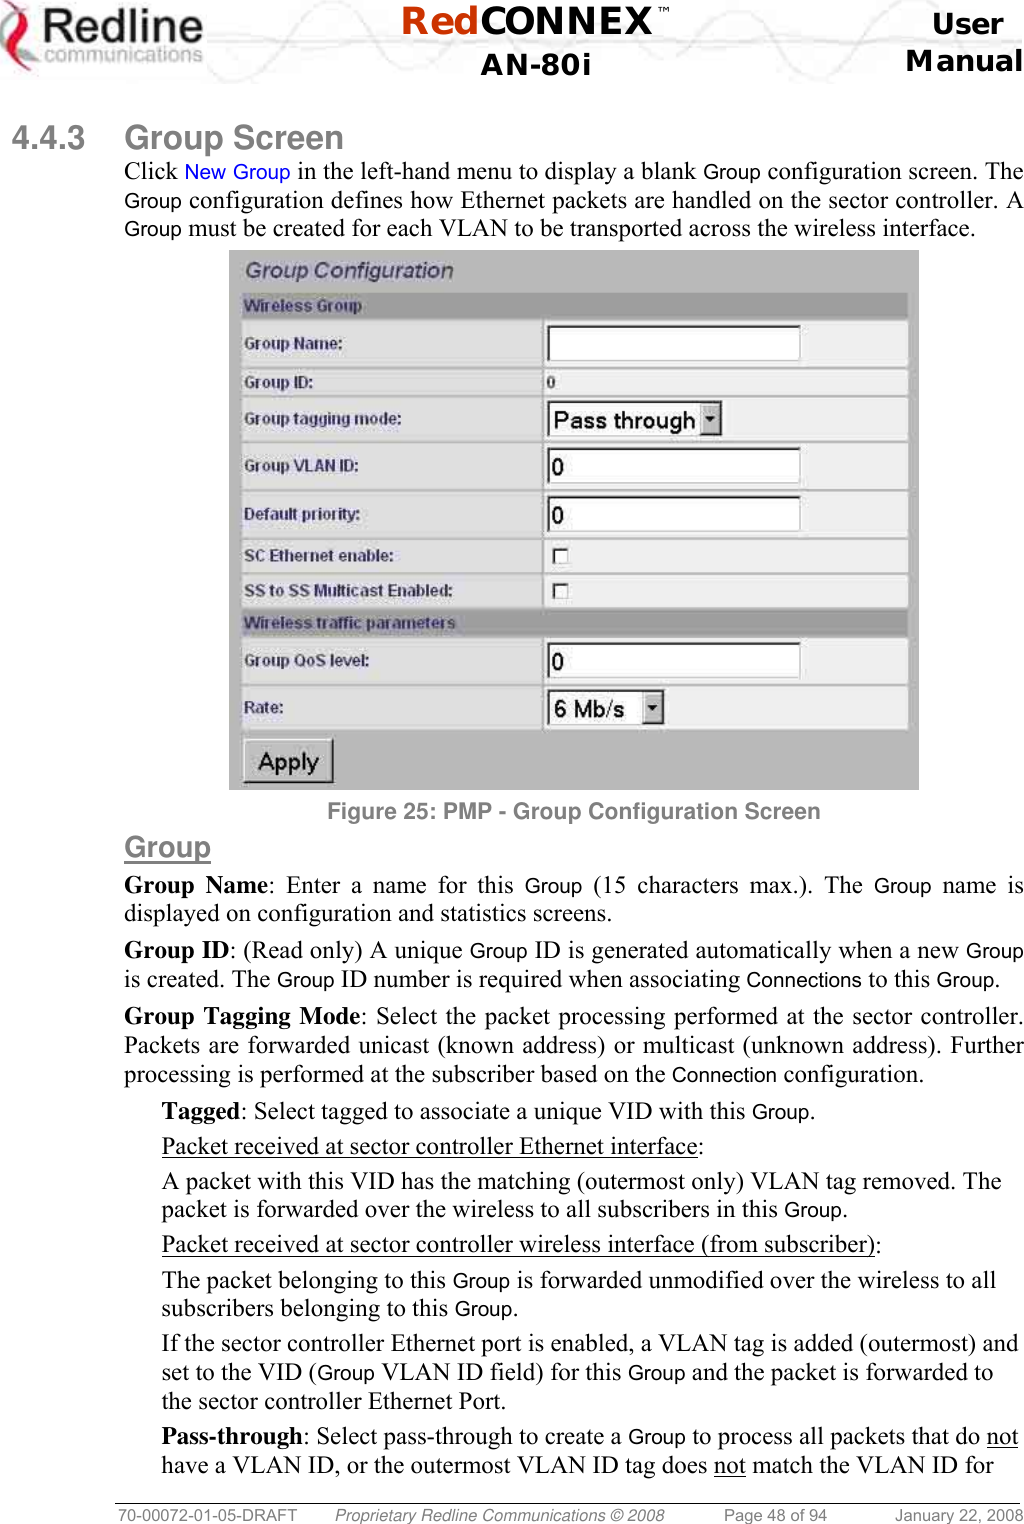  RedCONNEX™    User  AN-80i Manual  70-00072-01-05-DRAFT  Proprietary Redline Communications © 2008  Page 48 of 94  January 22, 2008  4.4.3 Group Screen Click New Group in the left-hand menu to display a blank Group configuration screen. The Group configuration defines how Ethernet packets are handled on the sector controller. A Group must be created for each VLAN to be transported across the wireless interface.  Figure 25: PMP - Group Configuration Screen  Group Group Name: Enter a name for this Group (15 characters max.). The Group name is displayed on configuration and statistics screens. Group ID: (Read only) A unique Group ID is generated automatically when a new Group is created. The Group ID number is required when associating Connections to this Group. Group Tagging Mode: Select the packet processing performed at the sector controller. Packets are forwarded unicast (known address) or multicast (unknown address). Further processing is performed at the subscriber based on the Connection configuration. Tagged: Select tagged to associate a unique VID with this Group. Packet received at sector controller Ethernet interface: A packet with this VID has the matching (outermost only) VLAN tag removed. The packet is forwarded over the wireless to all subscribers in this Group. Packet received at sector controller wireless interface (from subscriber): The packet belonging to this Group is forwarded unmodified over the wireless to all subscribers belonging to this Group.  If the sector controller Ethernet port is enabled, a VLAN tag is added (outermost) and set to the VID (Group VLAN ID field) for this Group and the packet is forwarded to the sector controller Ethernet Port. Pass-through: Select pass-through to create a Group to process all packets that do not have a VLAN ID, or the outermost VLAN ID tag does not match the VLAN ID for 